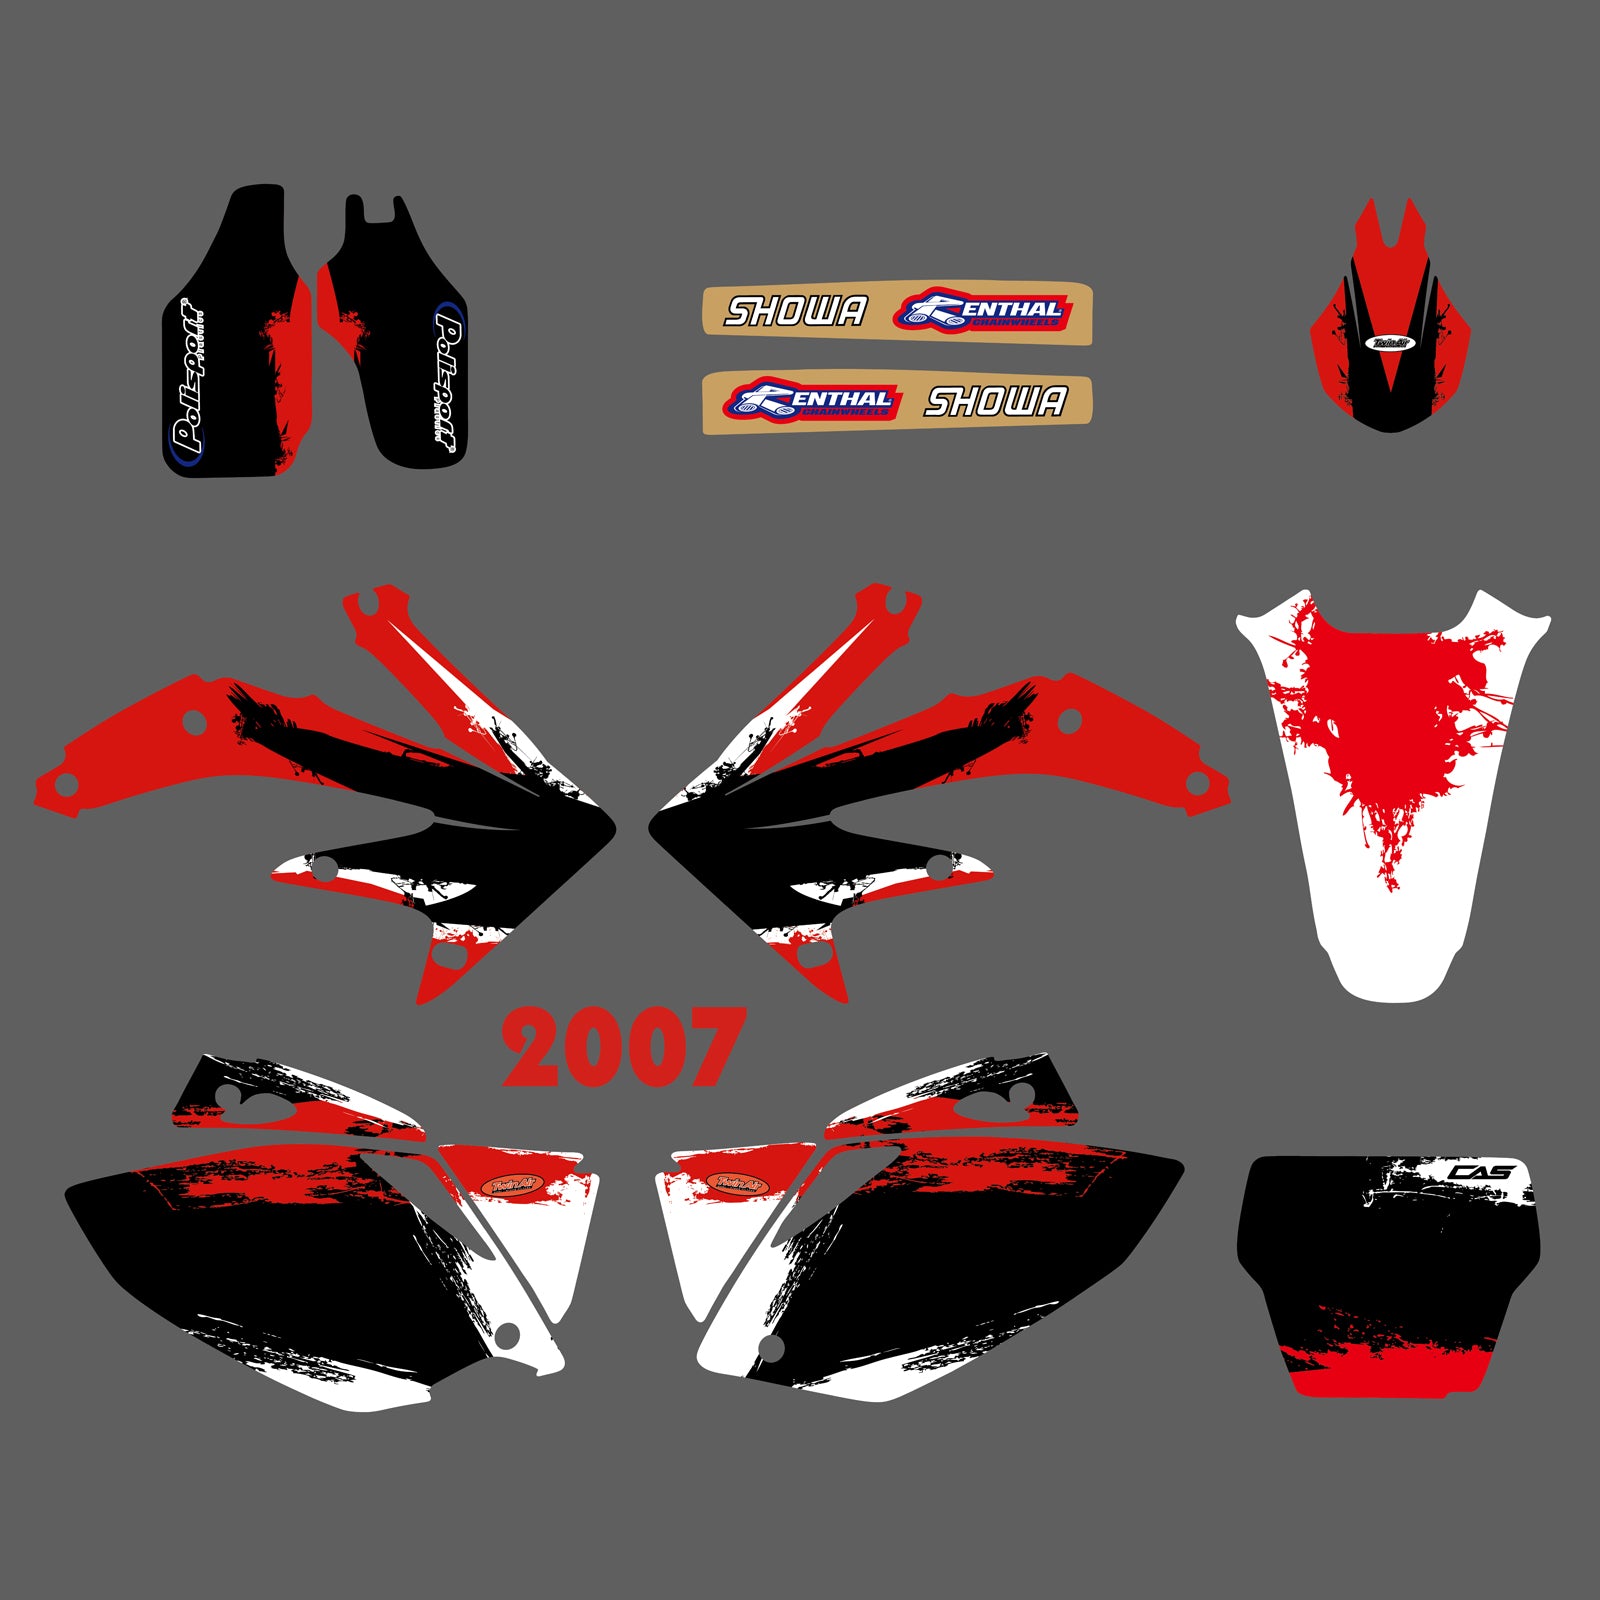 Team Graphics Backgrounds Decals Stickers For HONDA CRF450 2007